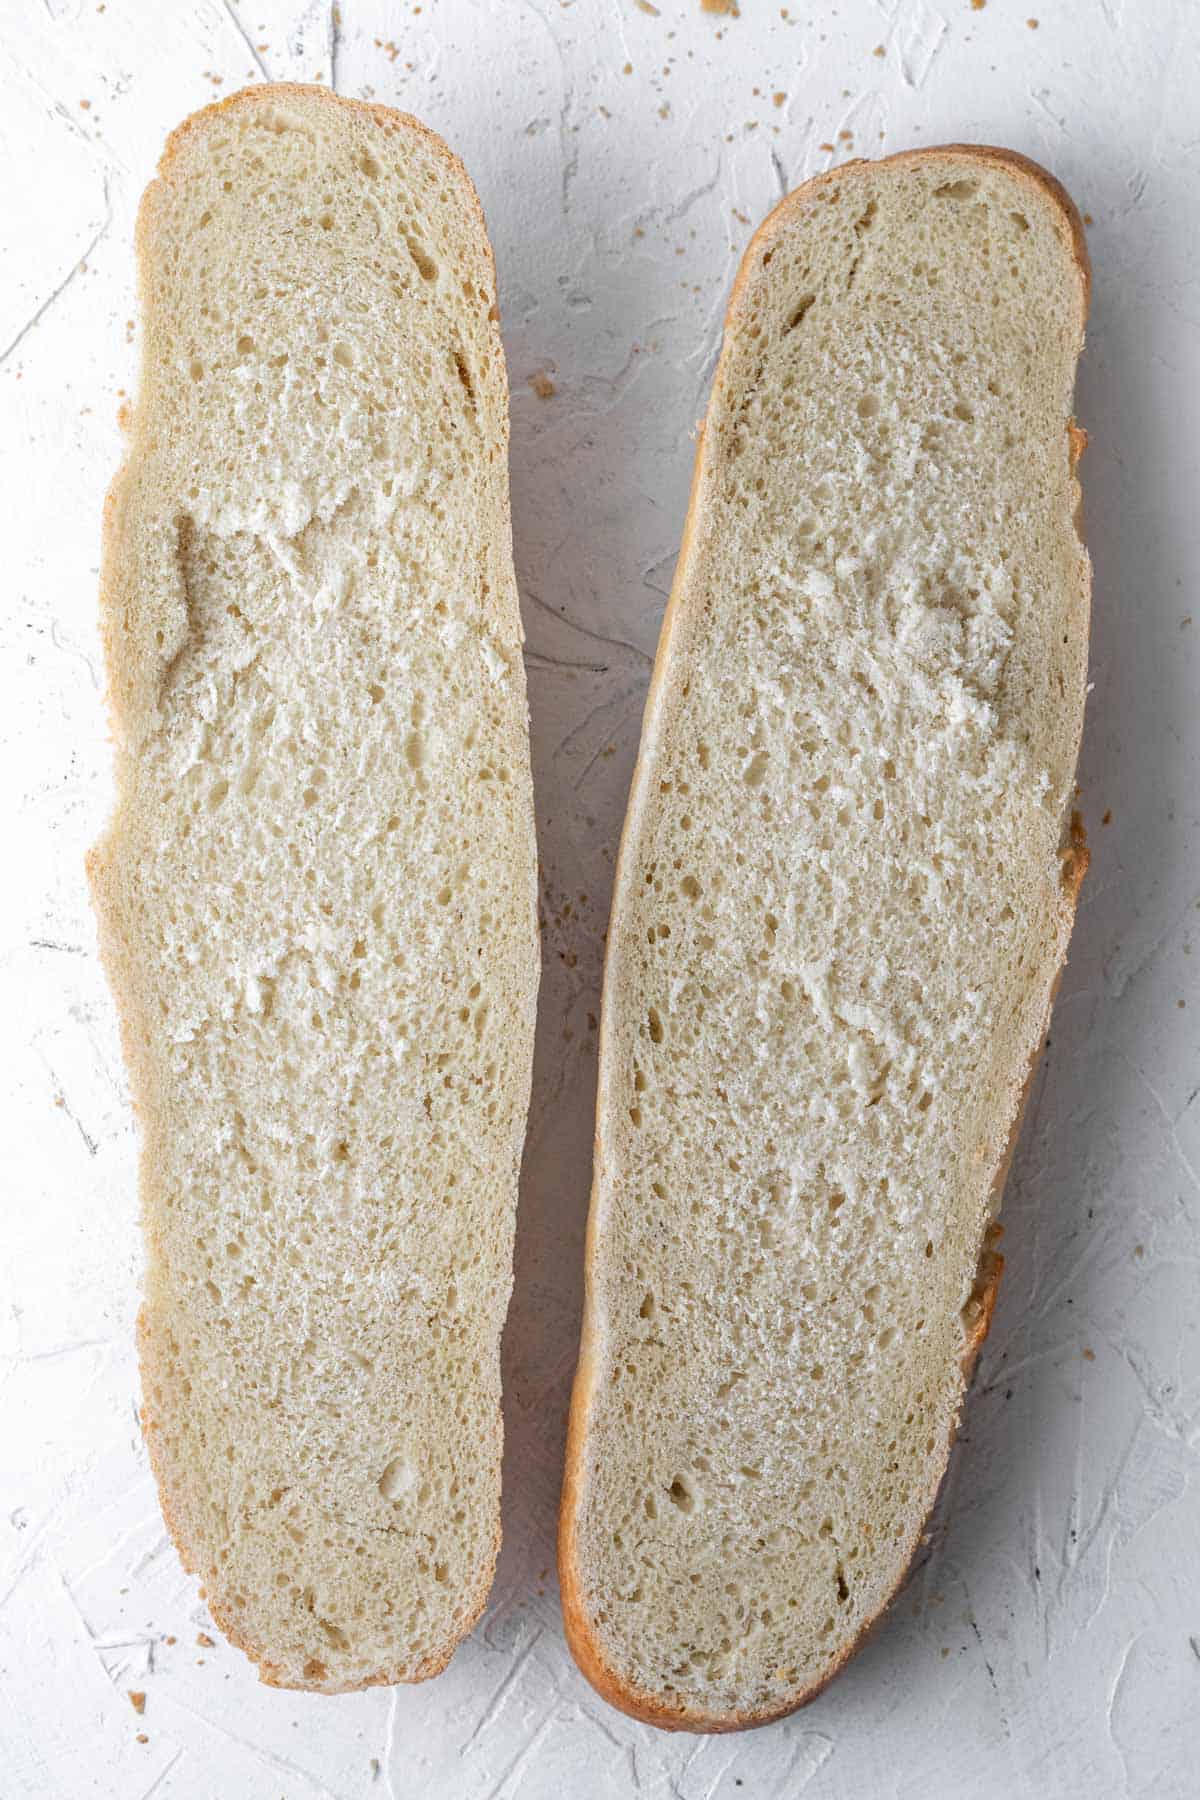 Two halves of french bread that was sliced down the middle lengthwise.